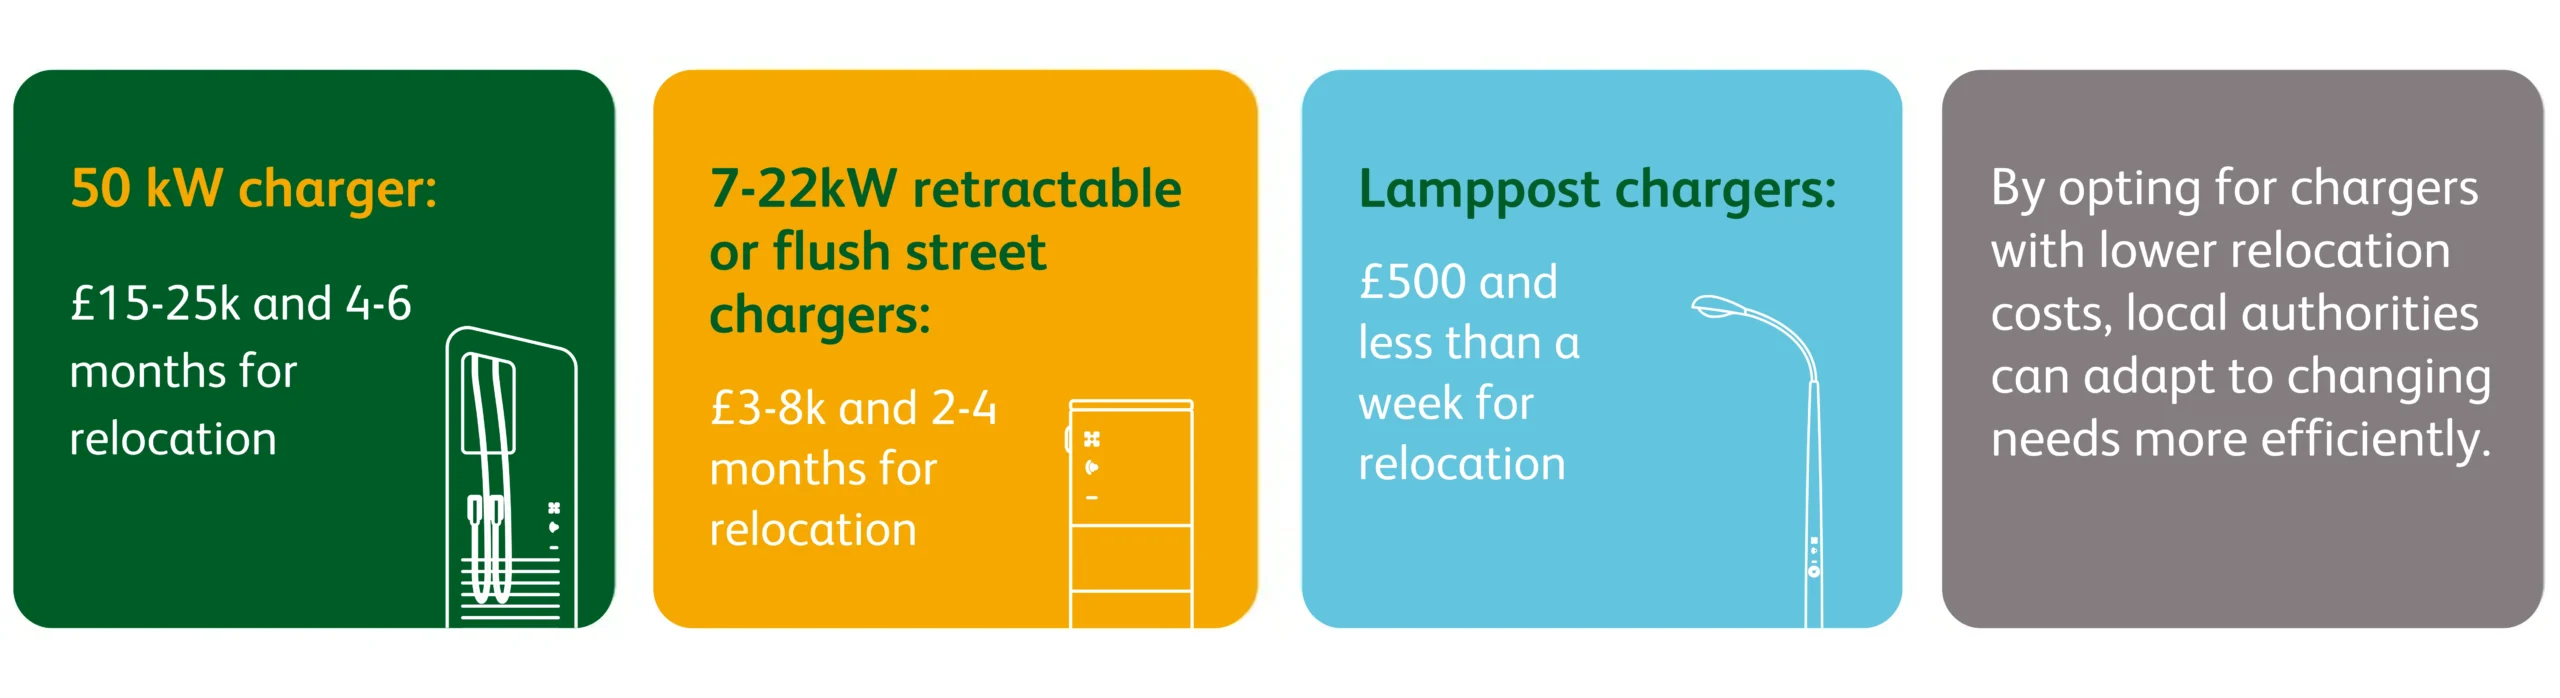 Relocation costs: 1) for a 50kW charger, it costs £15-25k and 4-6 months for relocation, 2) for a 7-22kW retractable or street flush charger, it costs £3-8k and 2-4 months for relocation, 3) for a lamppost charger, it costs £500 and less than 3 hours for relocation. By opting for chargers with lower relocation costs, local authorities can adapt to changing needs more efficiently.